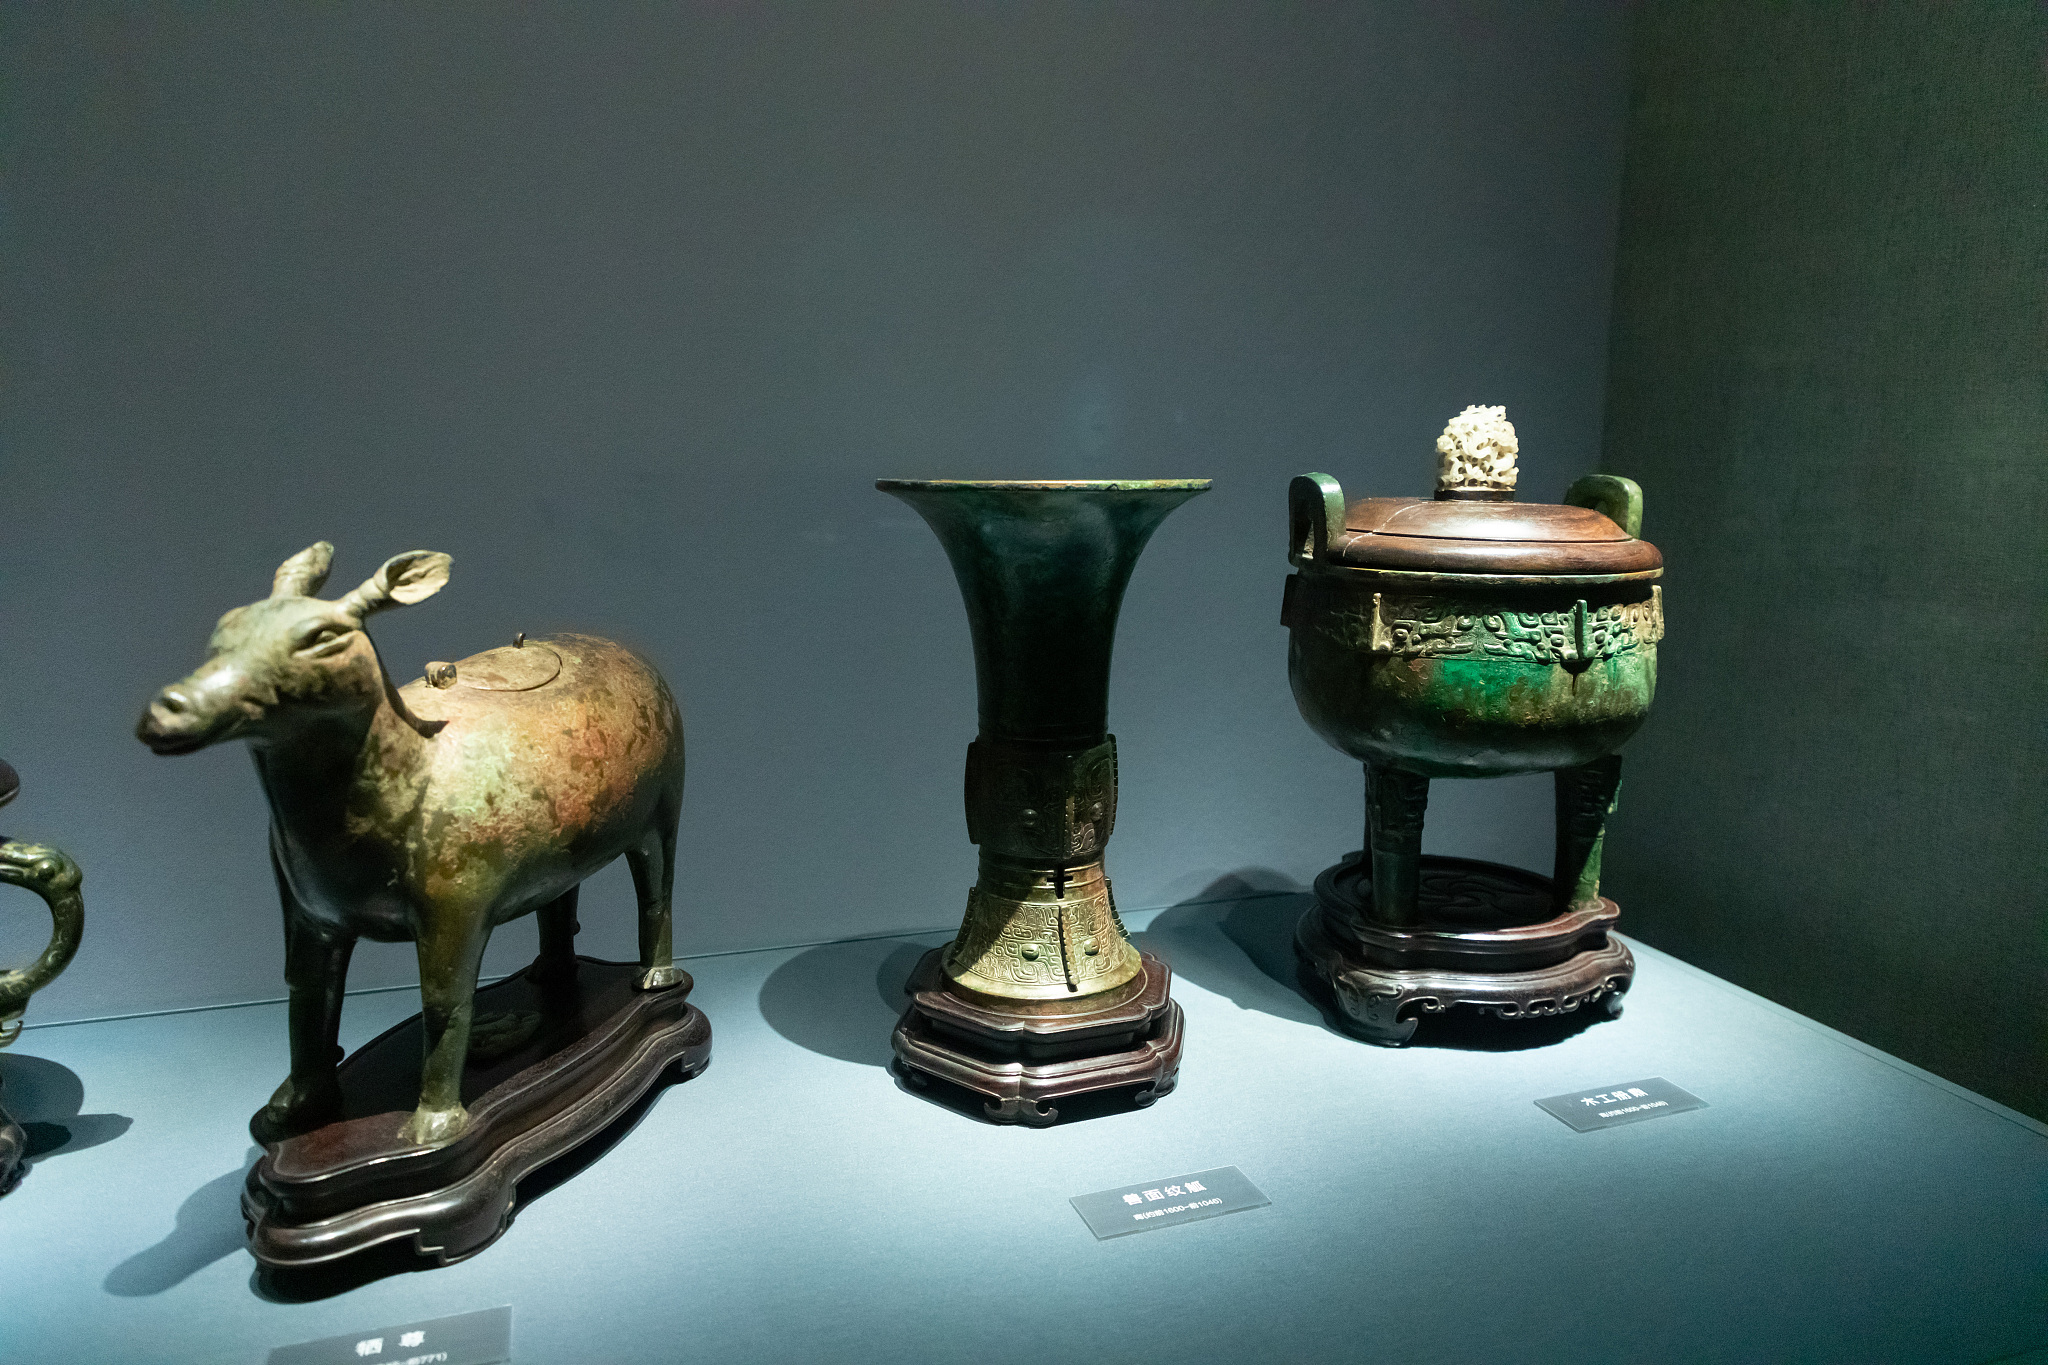 Offerings from the Shang (1600-1046 BC) and Zhou dynasties (1046-221 BC) bestowed upon the Confucius family by the Qianlong Emperor in 1771 are on display at an exhibition showcasing exquisite cultural relics from Shandong Province. /CFP